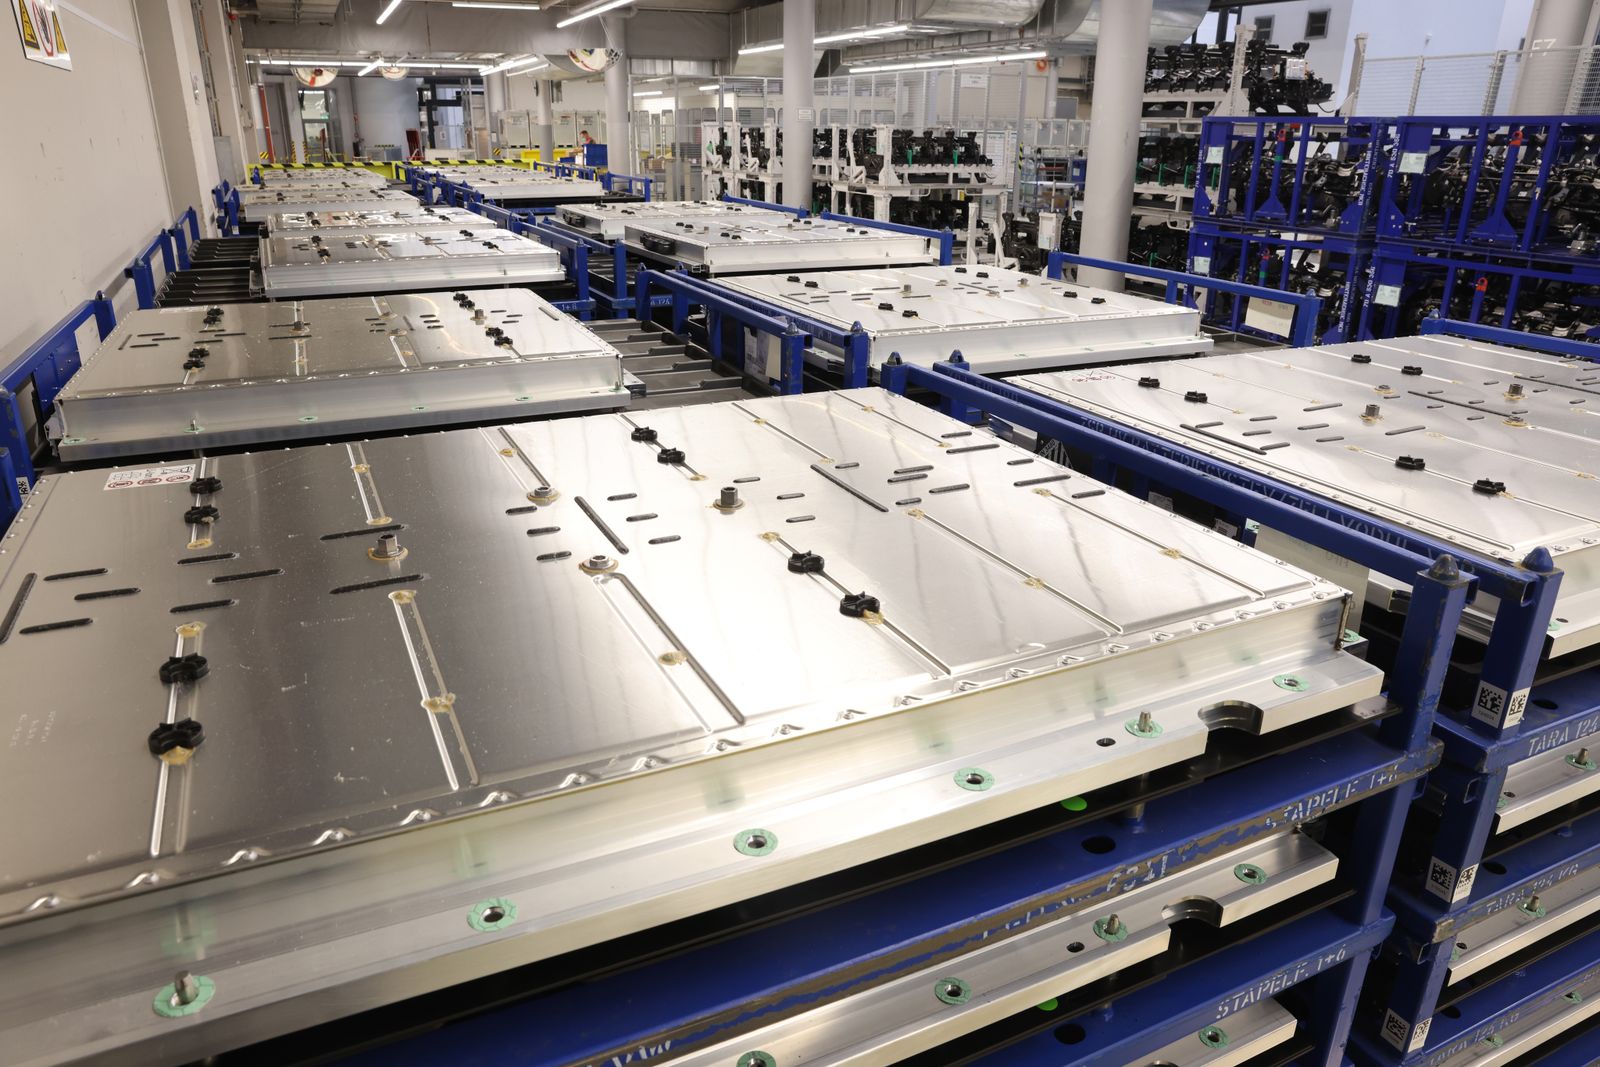 Rows of EV batteries in a manufacturing facility in Germany